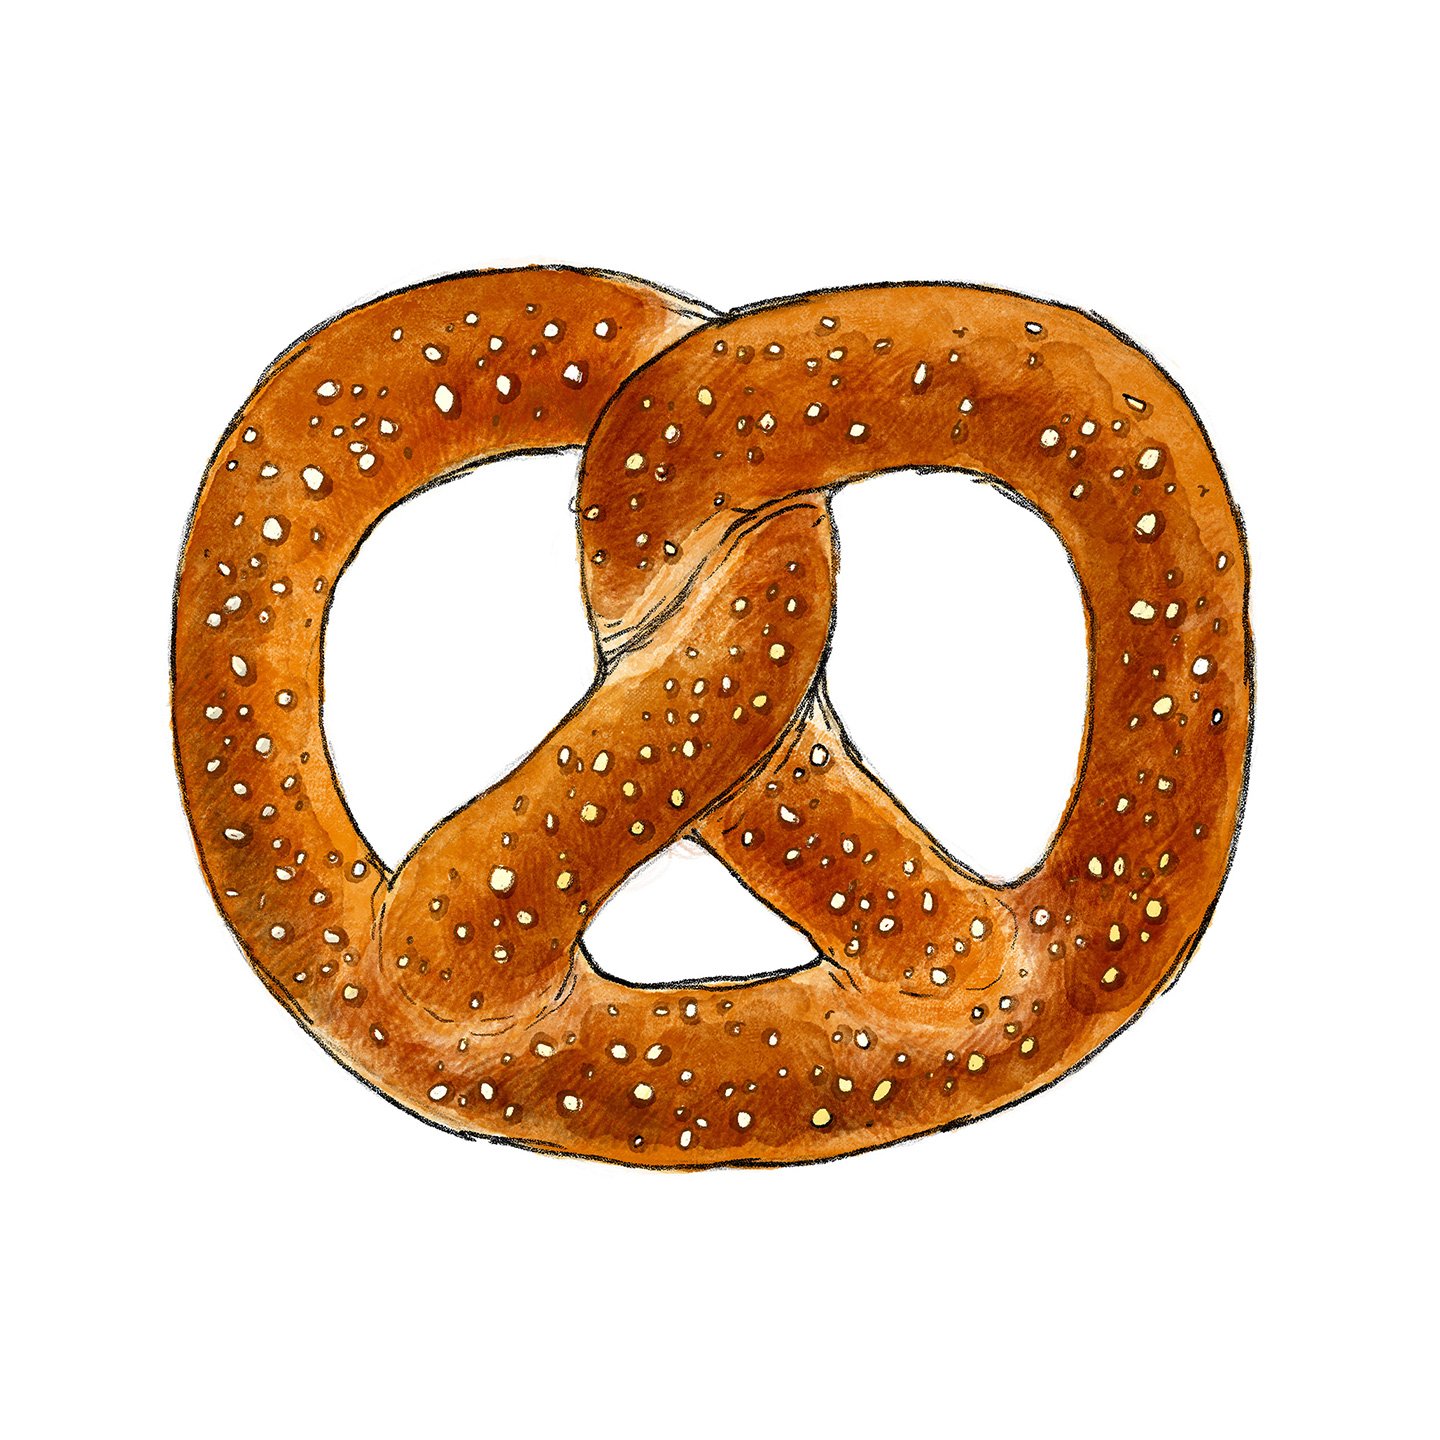 A podcast about pretzels. Hosted by @mcteich & @mmaternowski, distributed by @WUWMradio. What's your favorite brand of pretzel? 🥨